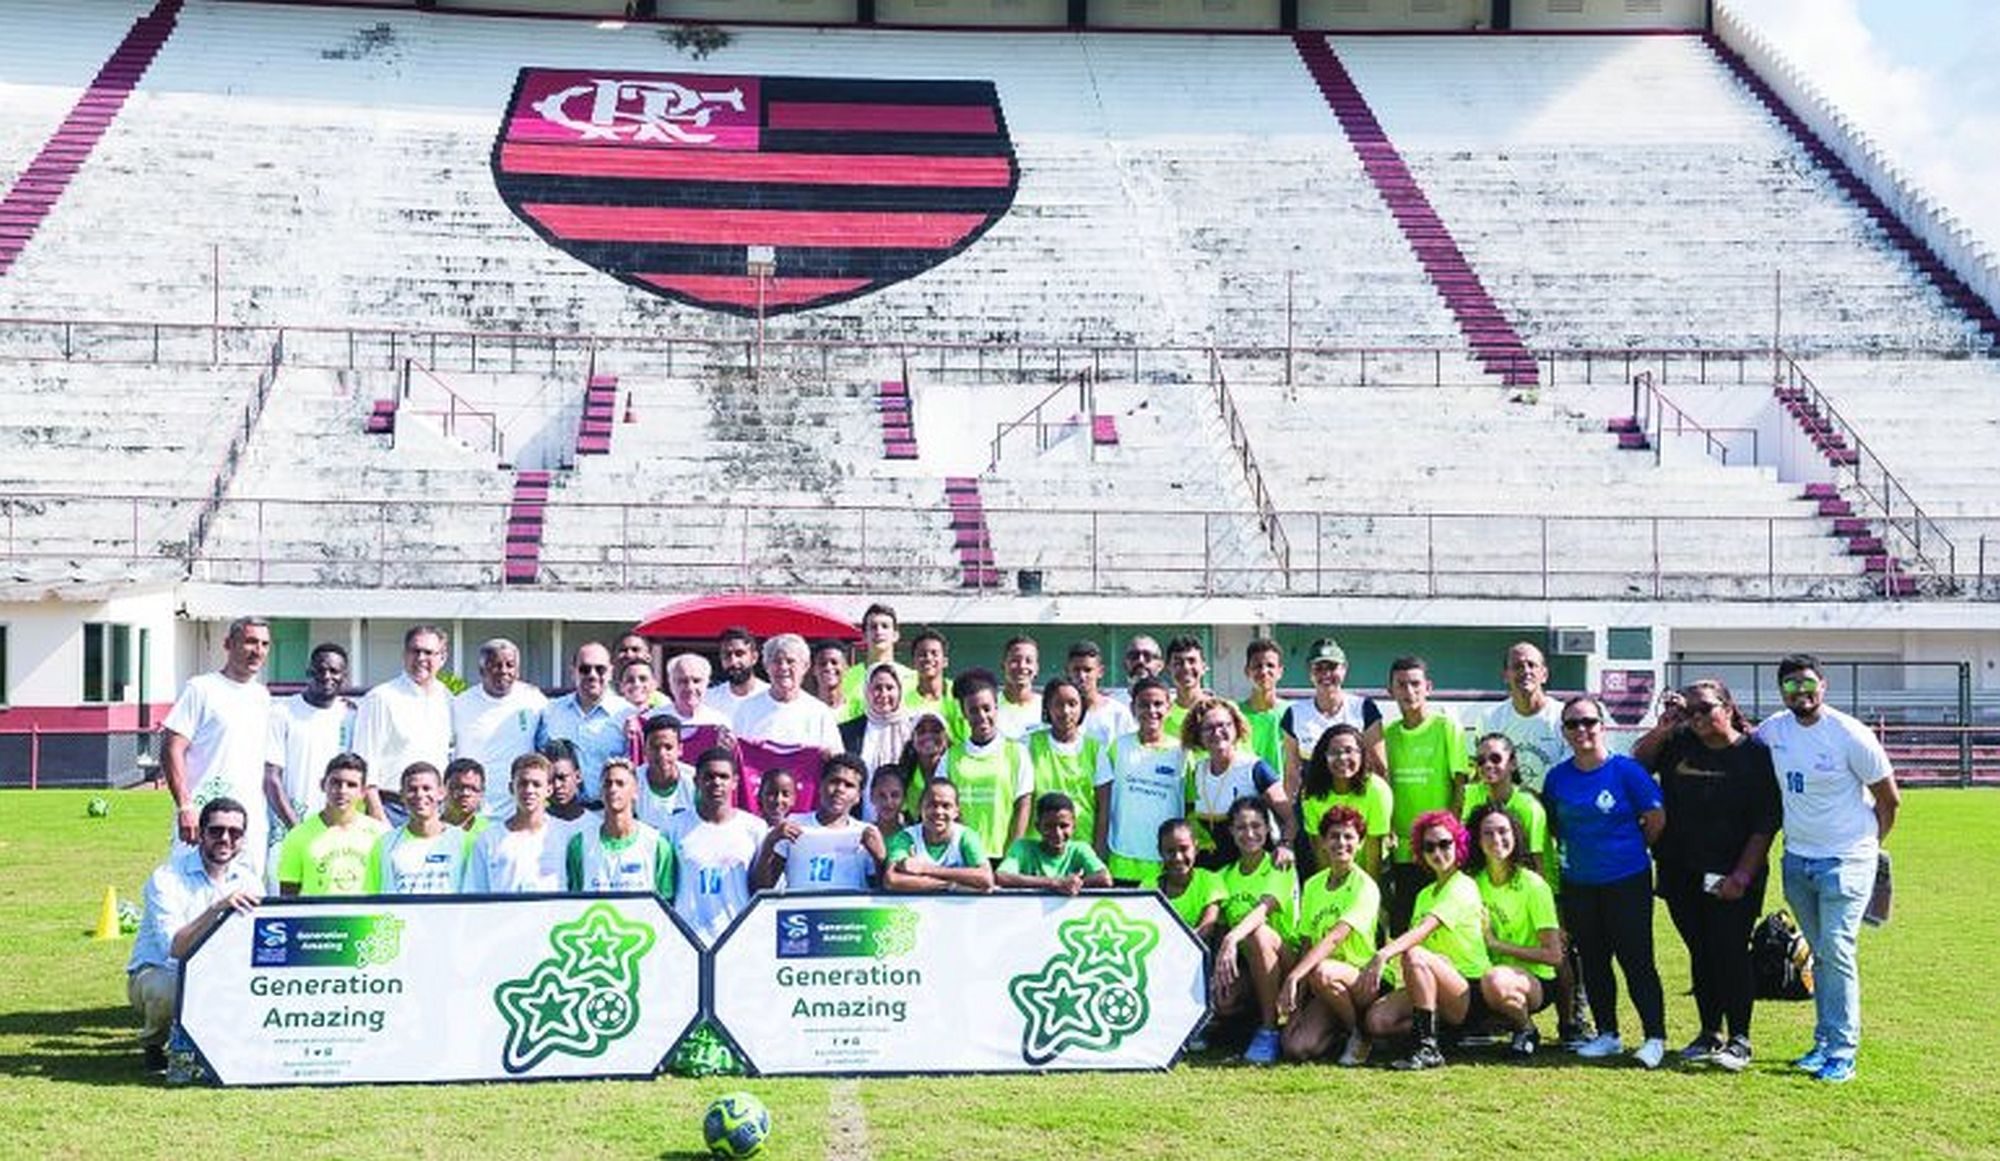 Generation Amazing, United Nations Office on Drugs and Crime and Flamengo FC officials with participants of soccer classes for poor kids in Rio.